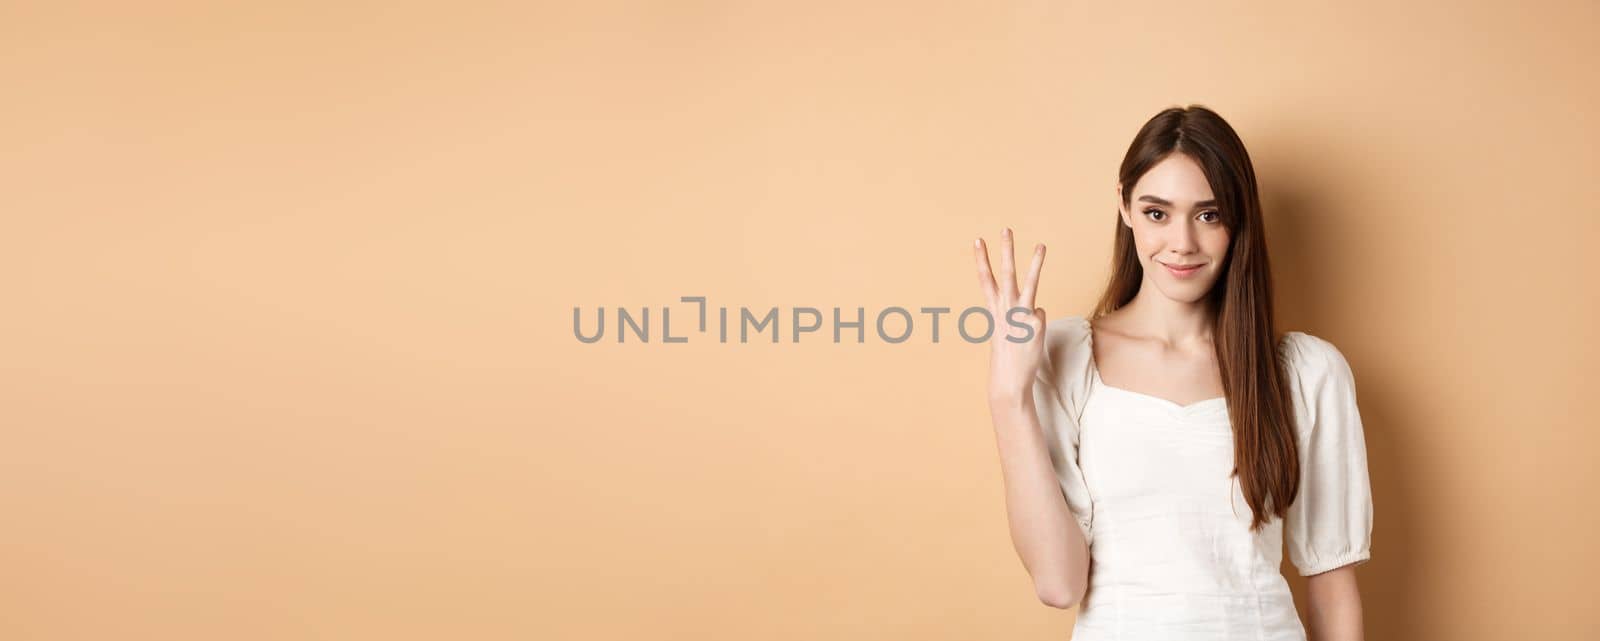 Attractive young woman show fingers number three, smiling and looking confident, standing on beige background.